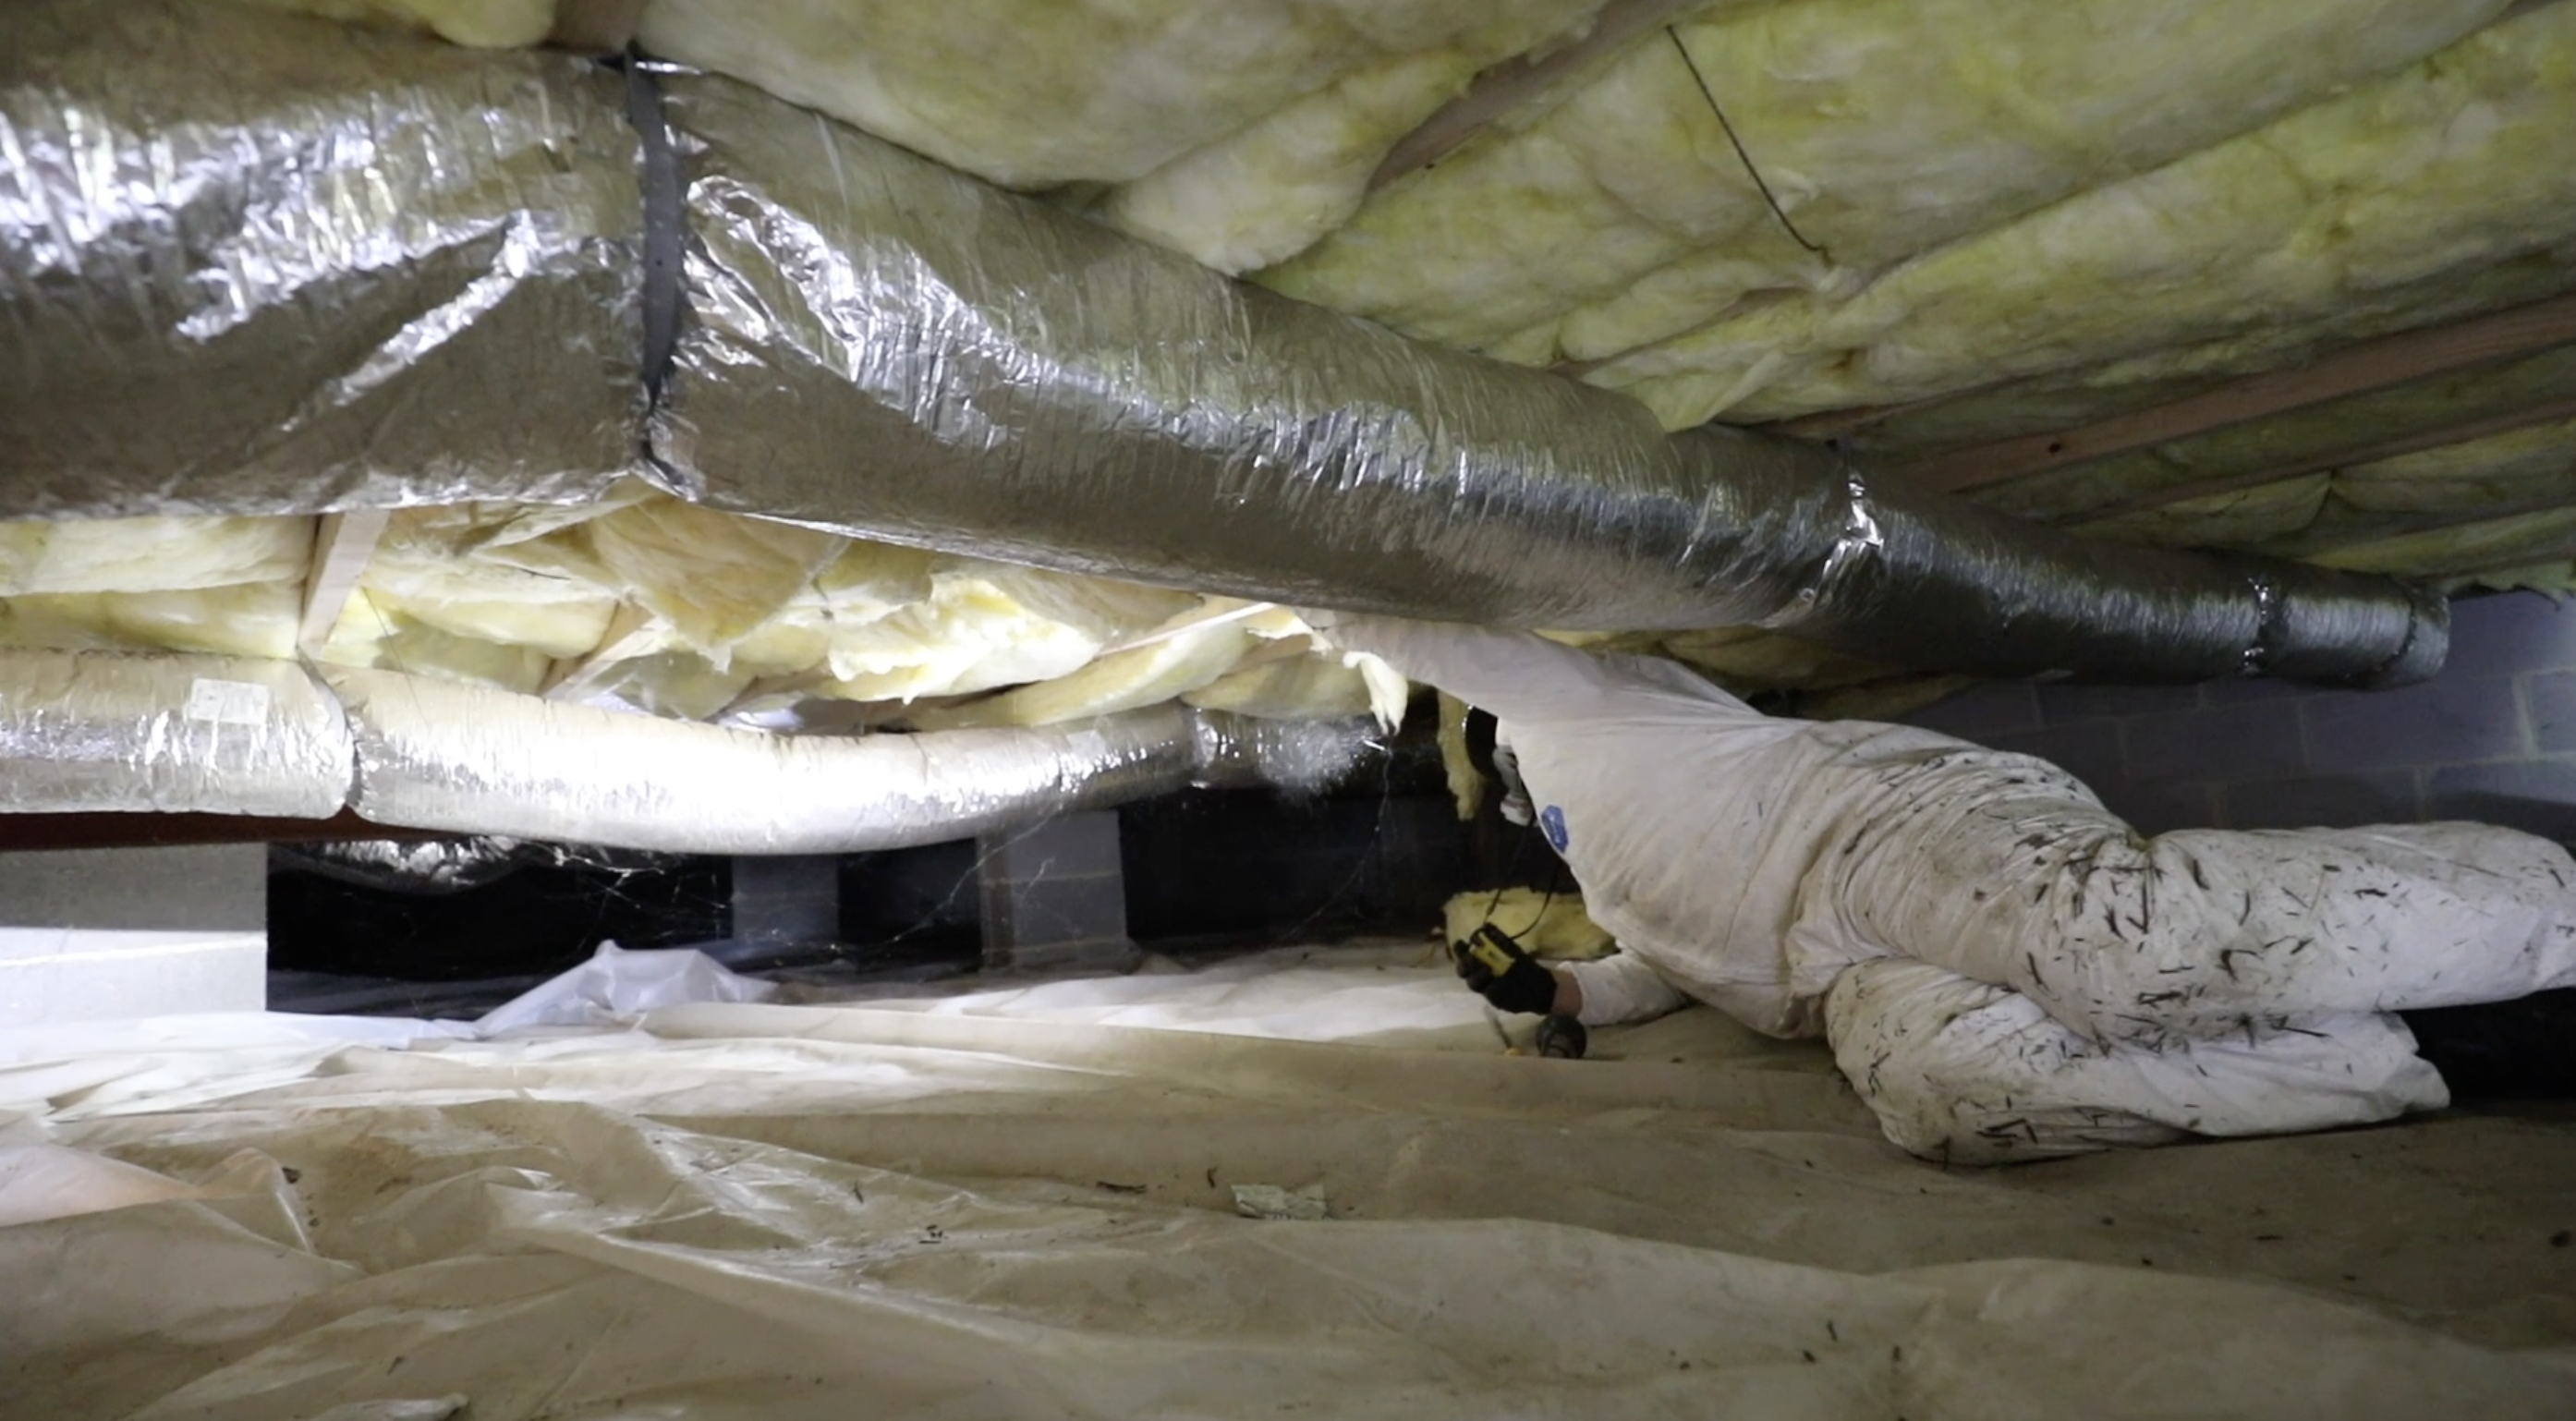 Man in crawlspace with insulation overhead